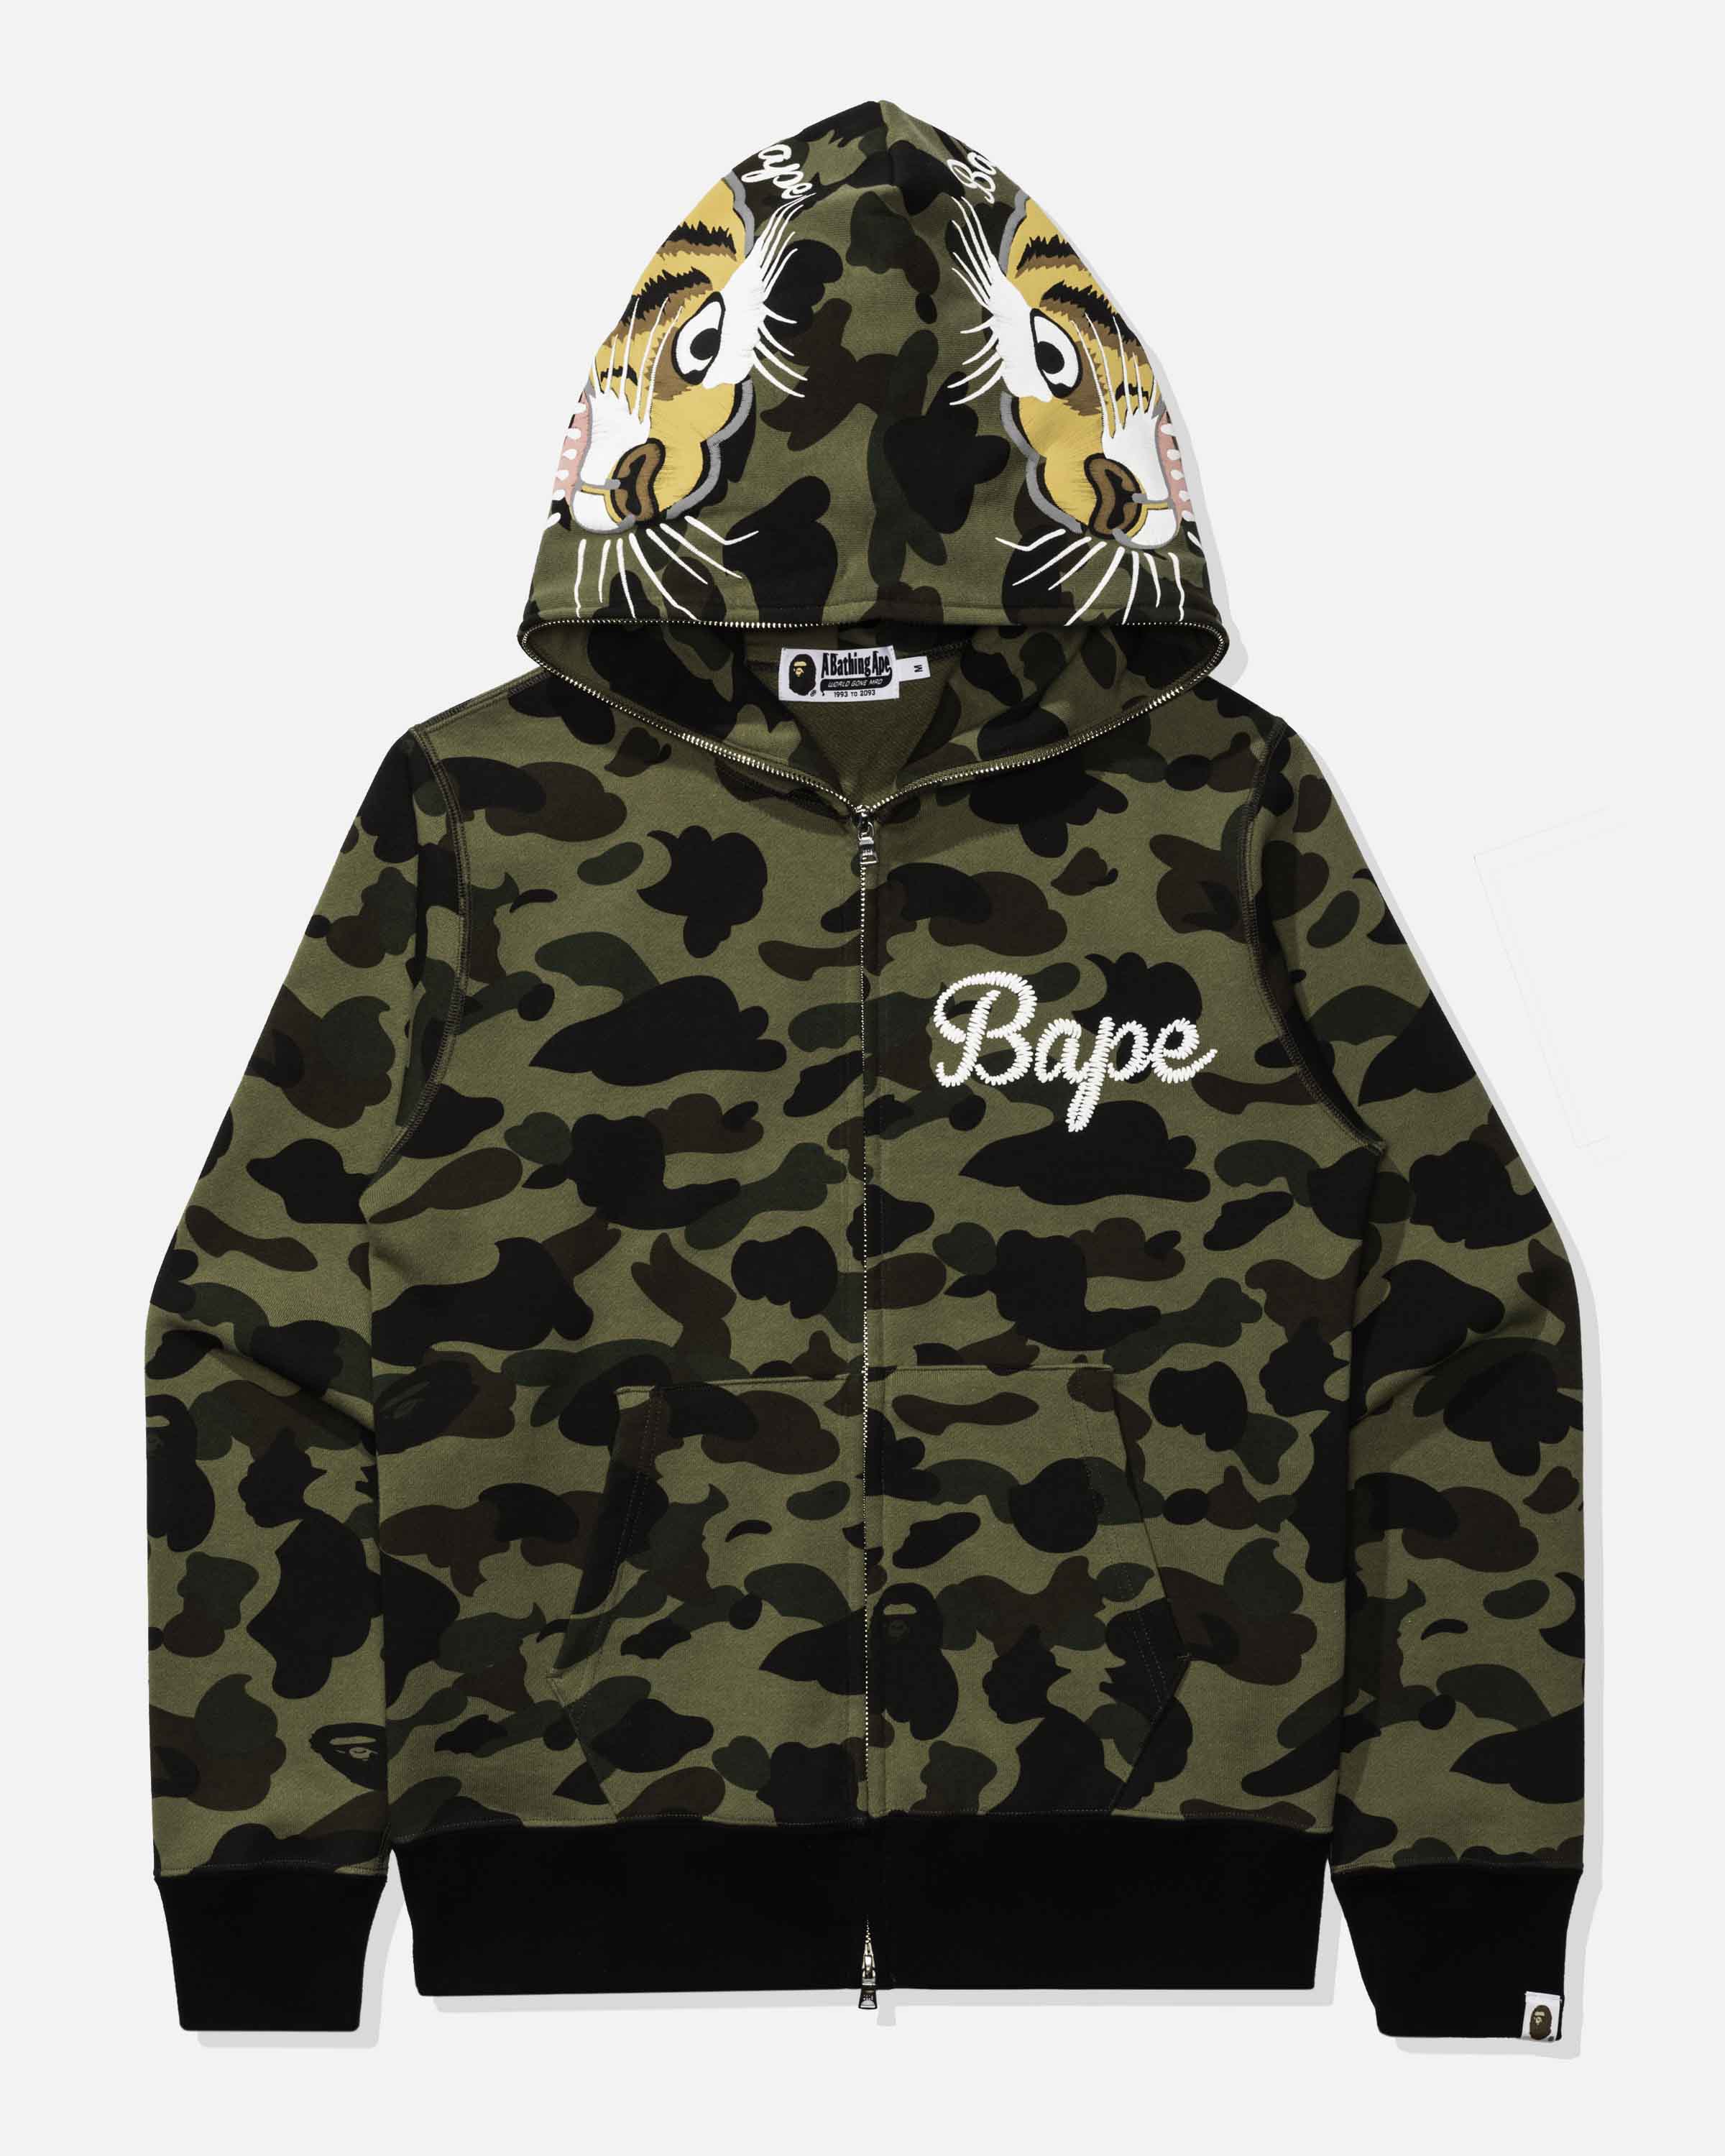 BAPE 1ST CAMO TIGER FULL ZIP HOODIE – Undefeated